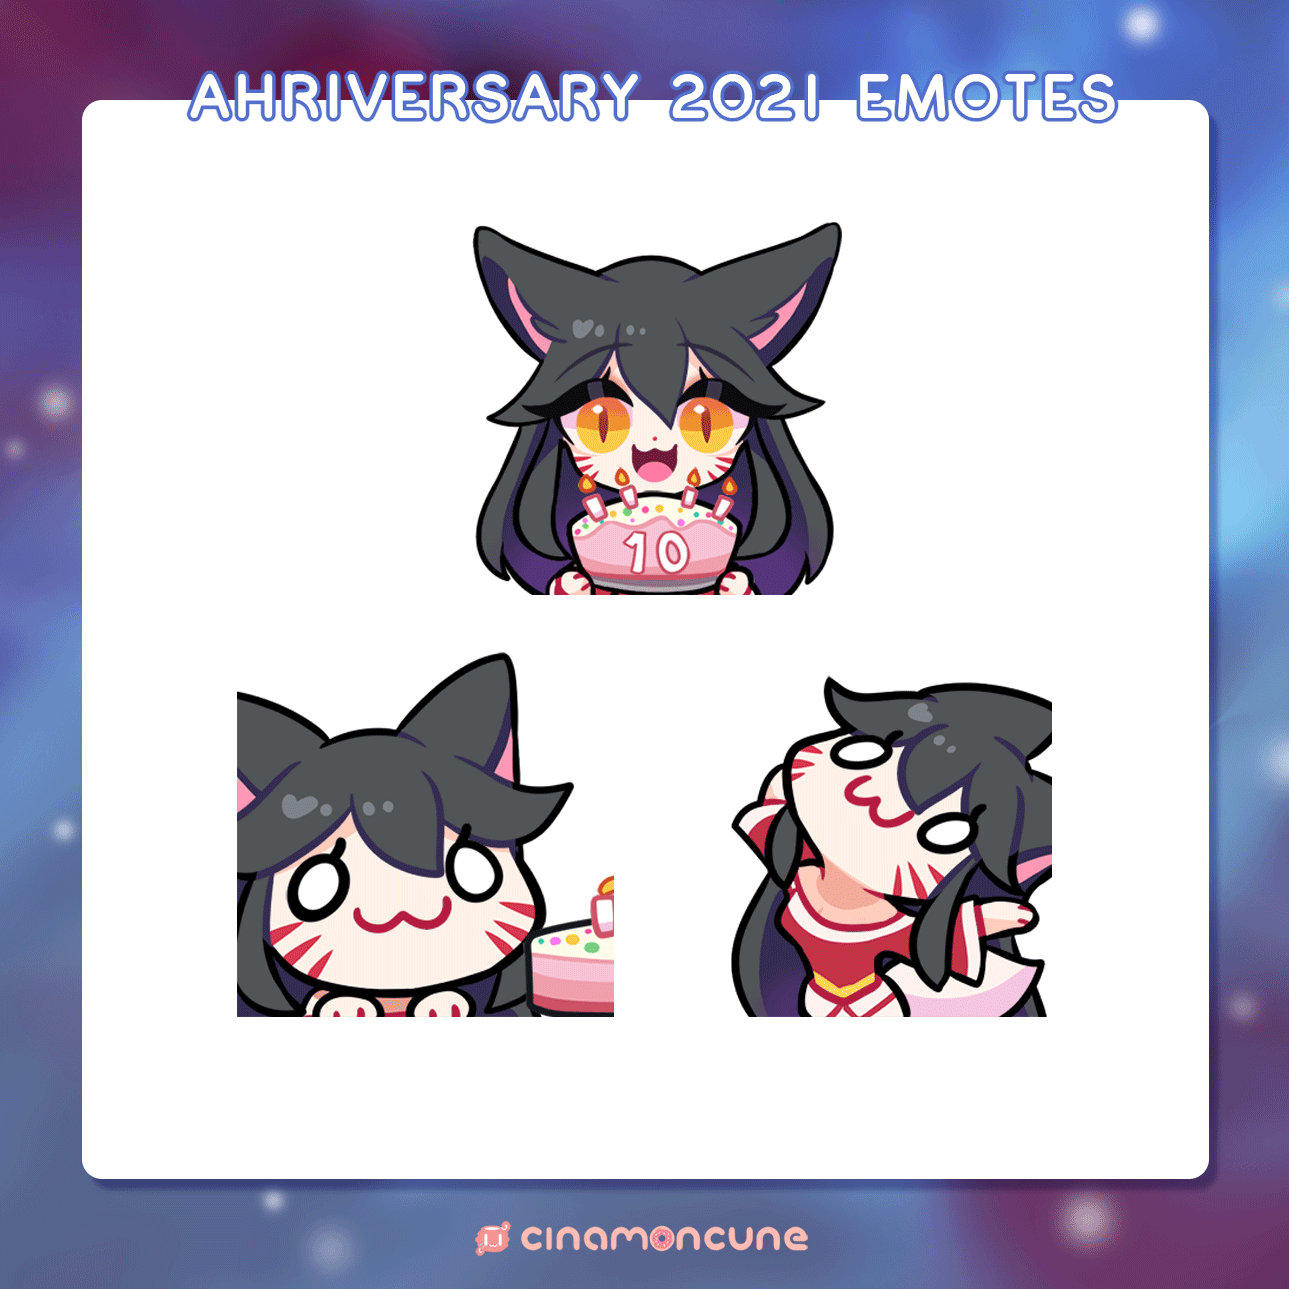 Ahriversary Emotes 2021 - cinamoncune's Ko-fi Shop - Ko-fi ❤️ Where  creators get support from fans through donations, memberships, shop sales  and more! The original 'Buy Me a Coffee' Page.